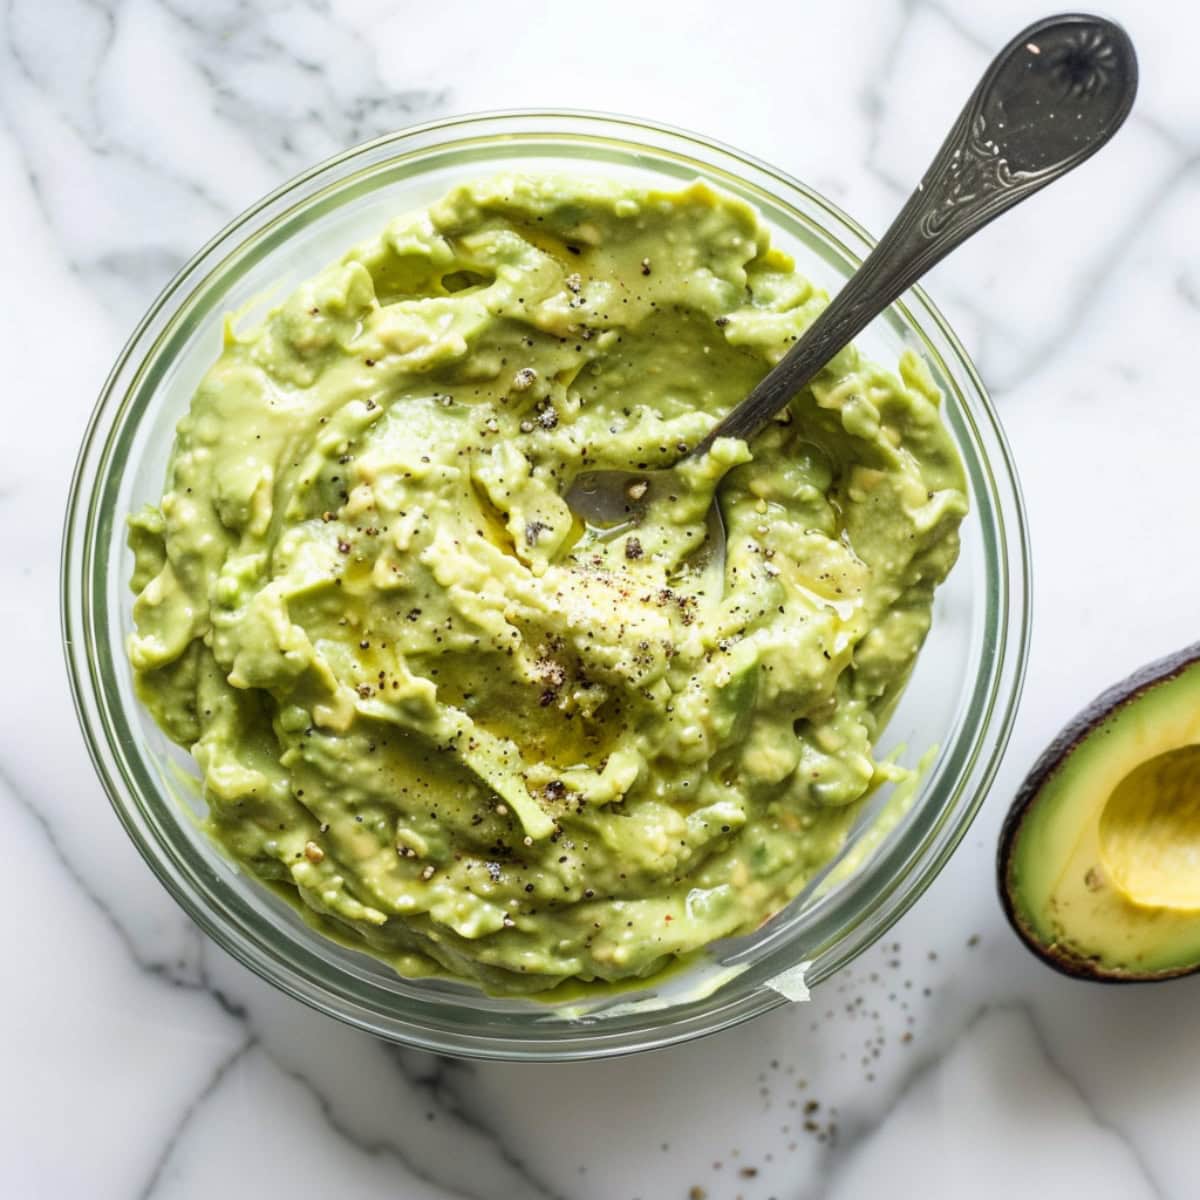 Mashed avocado in a glass bowl.